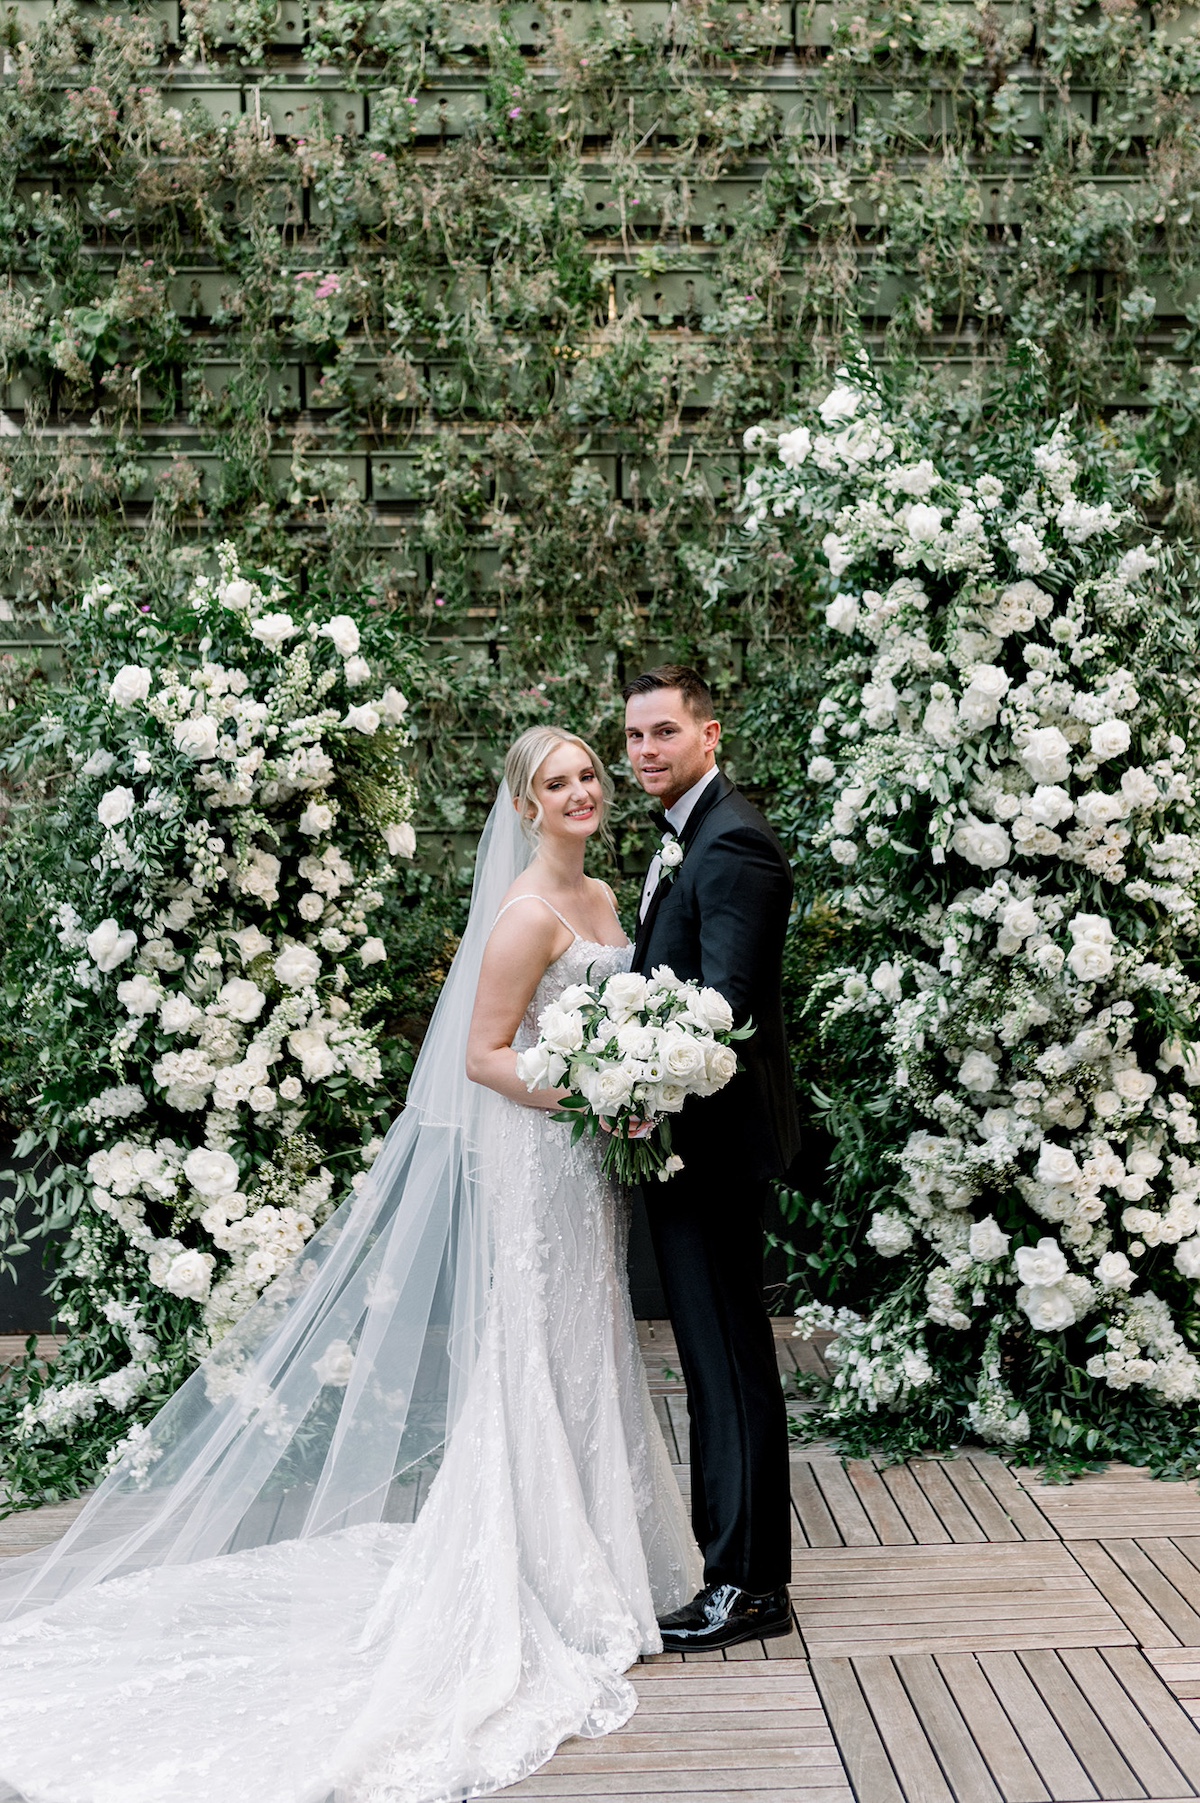 An elegant editorial portrait capturing the just-married bliss of the bride and groom at Excelsior, radiating sophistication and high-end romance.